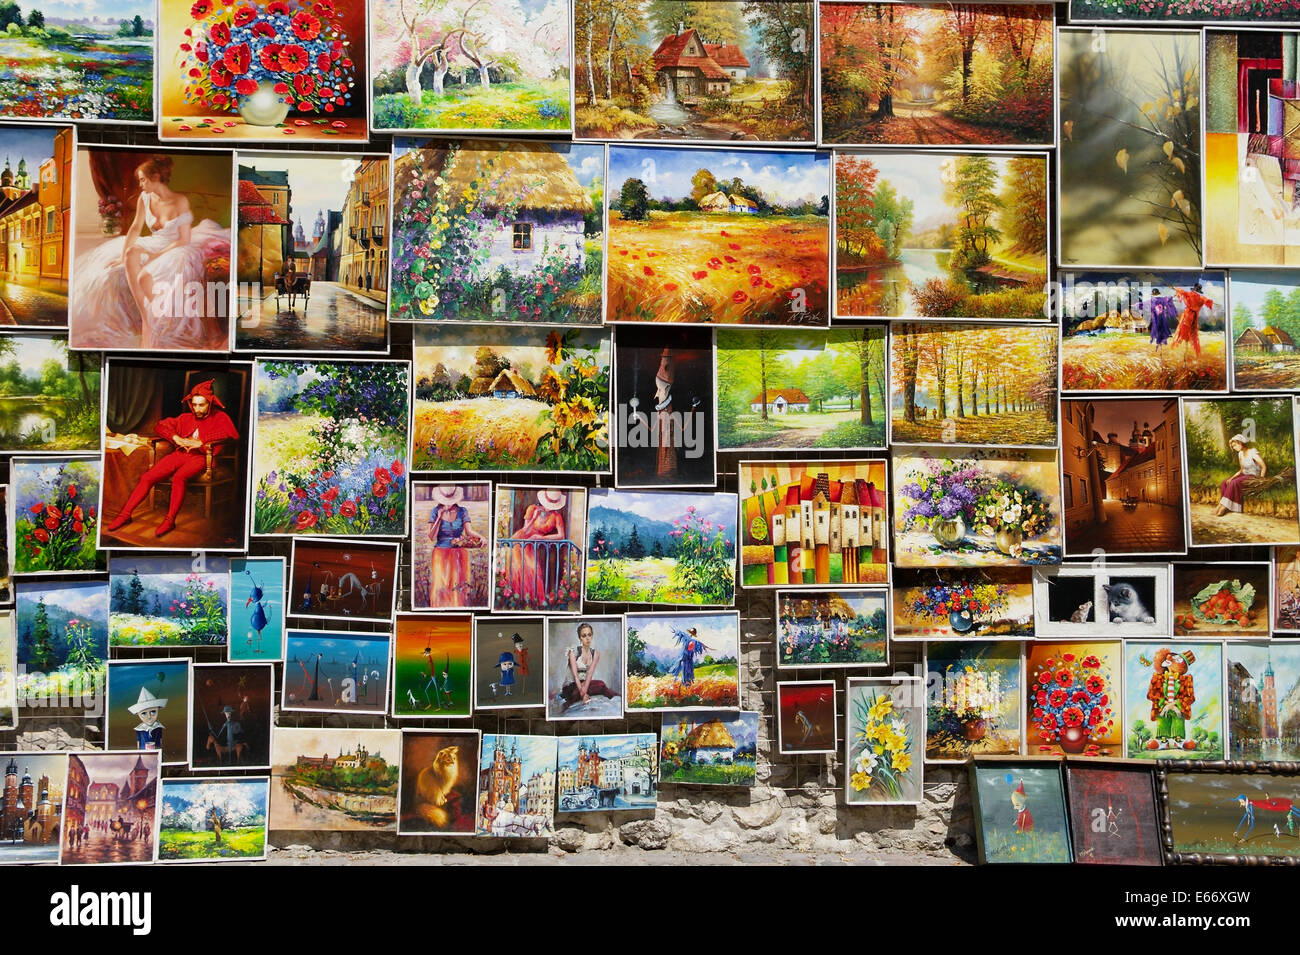 An open air art gallery with paintings for sale in the Old Town in Cracow, Poland. Stock Photo